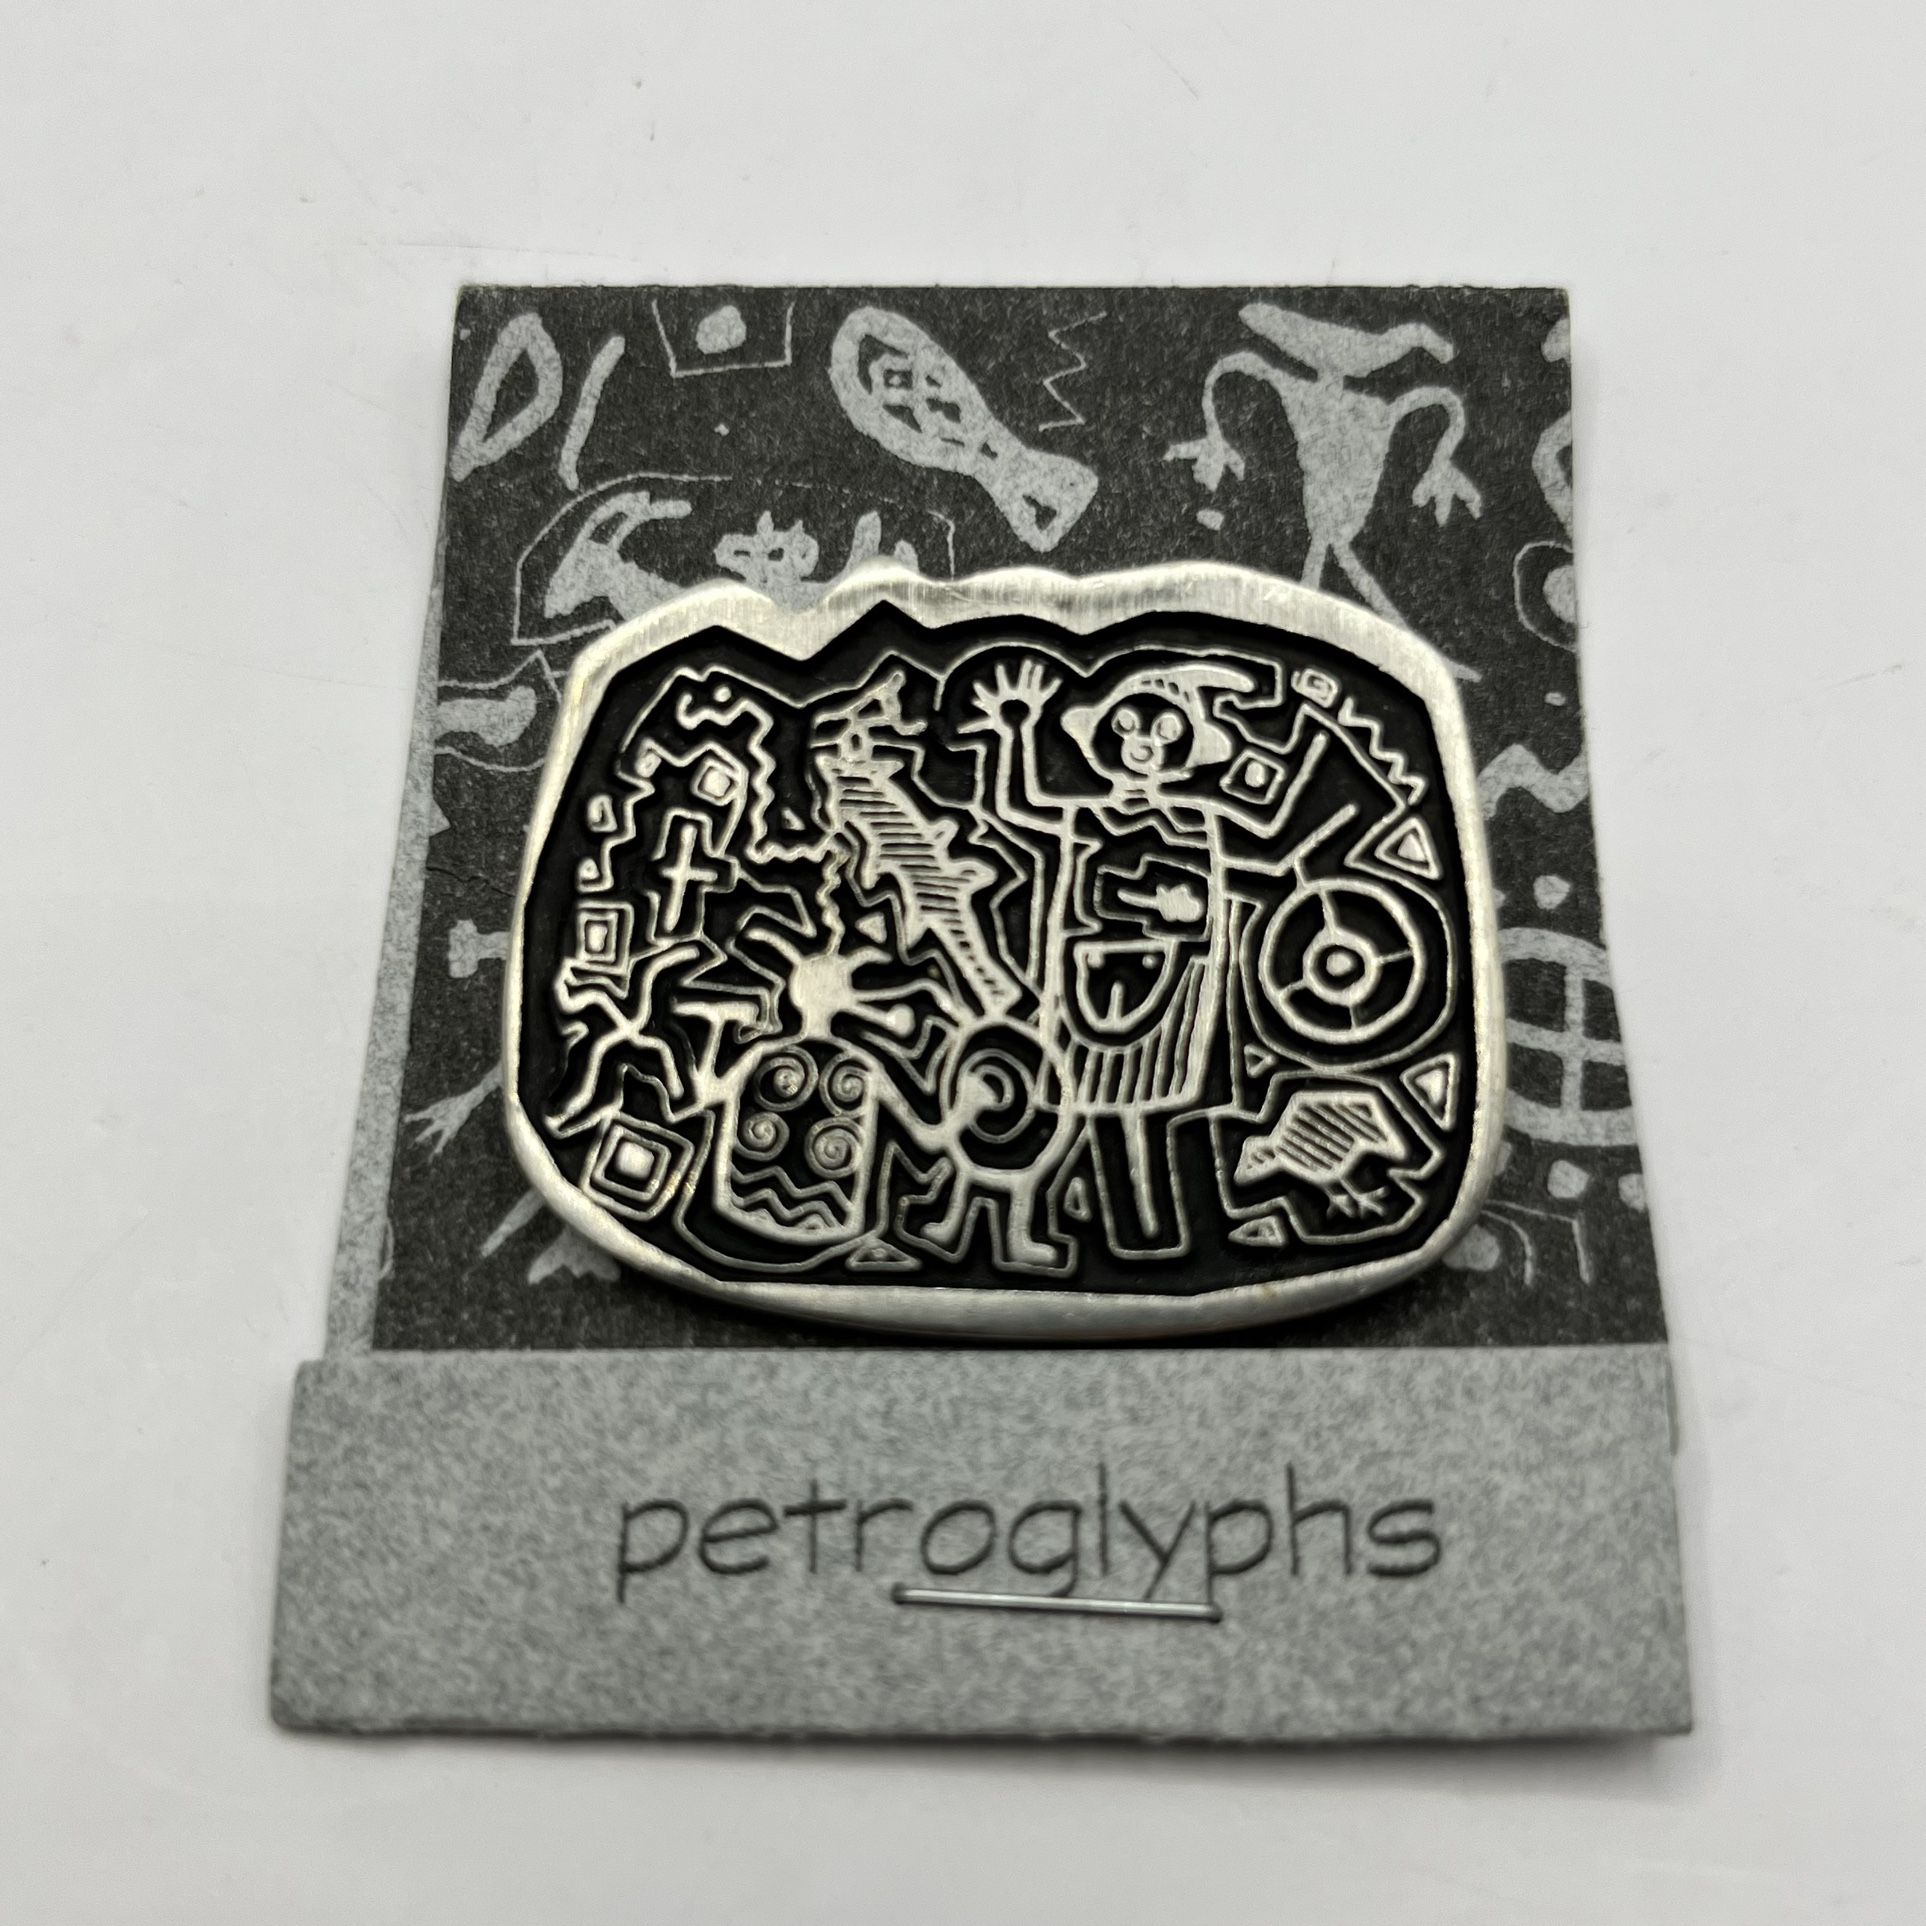 Petroglyphs “The Delight Makers” by Alice Warder Seely Pewter Pin Brooch